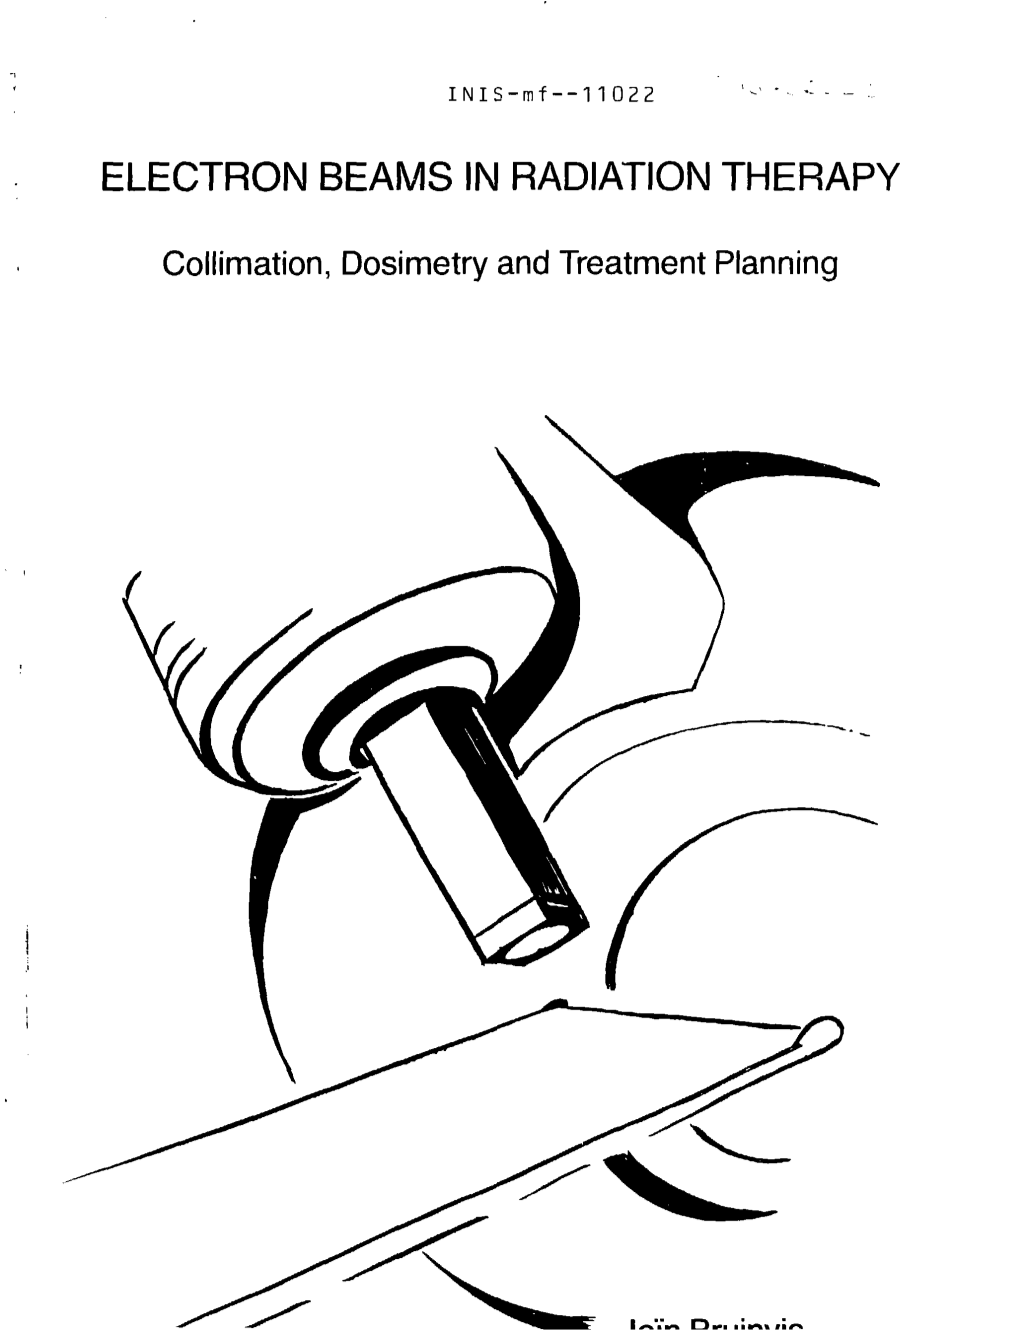 Electron Beams in Radiation Therapy